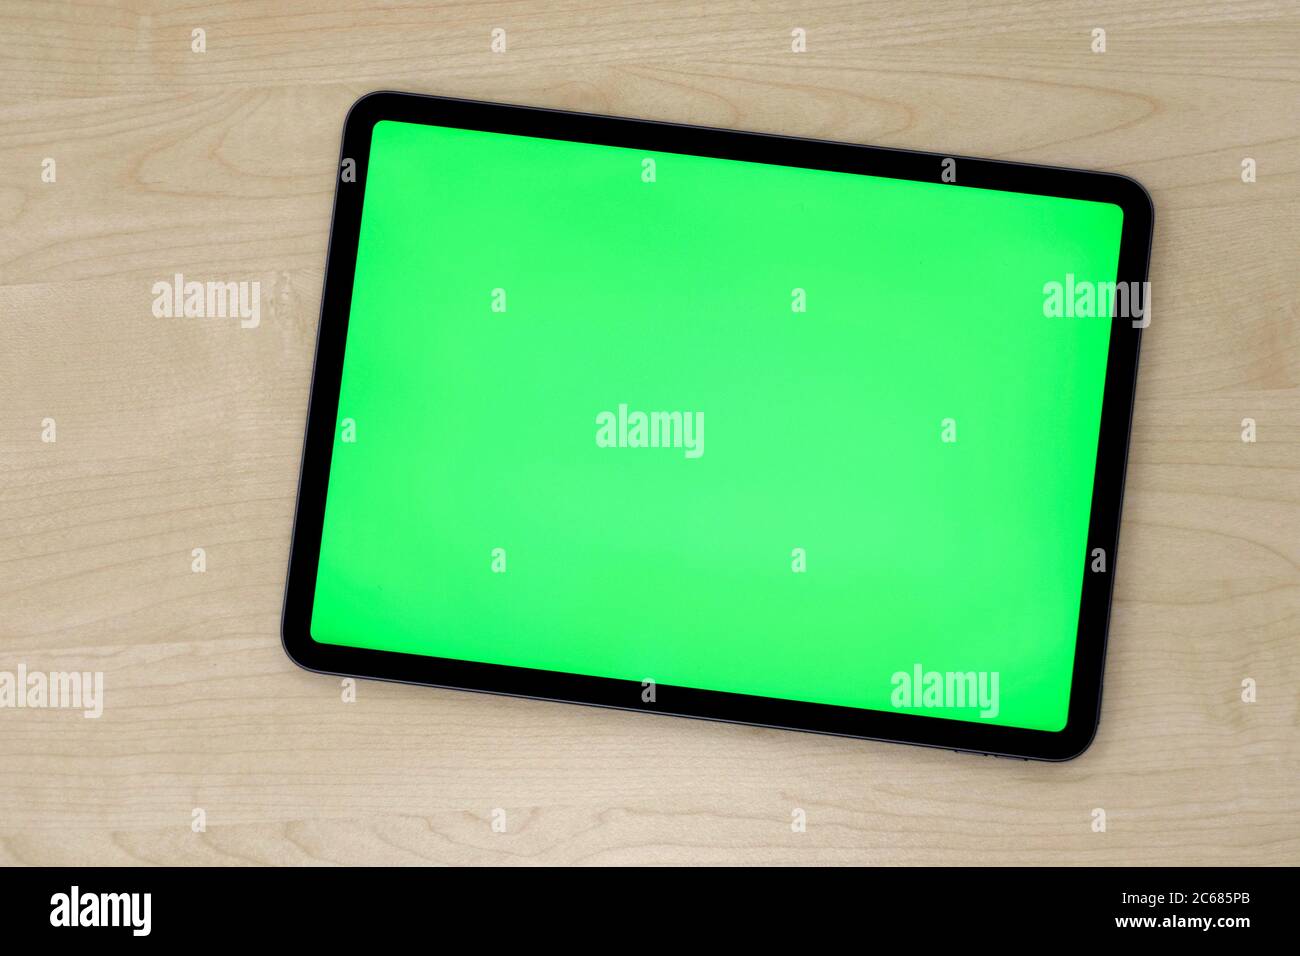 Top view of green screen tablet device on patterned wooden table Stock Photo